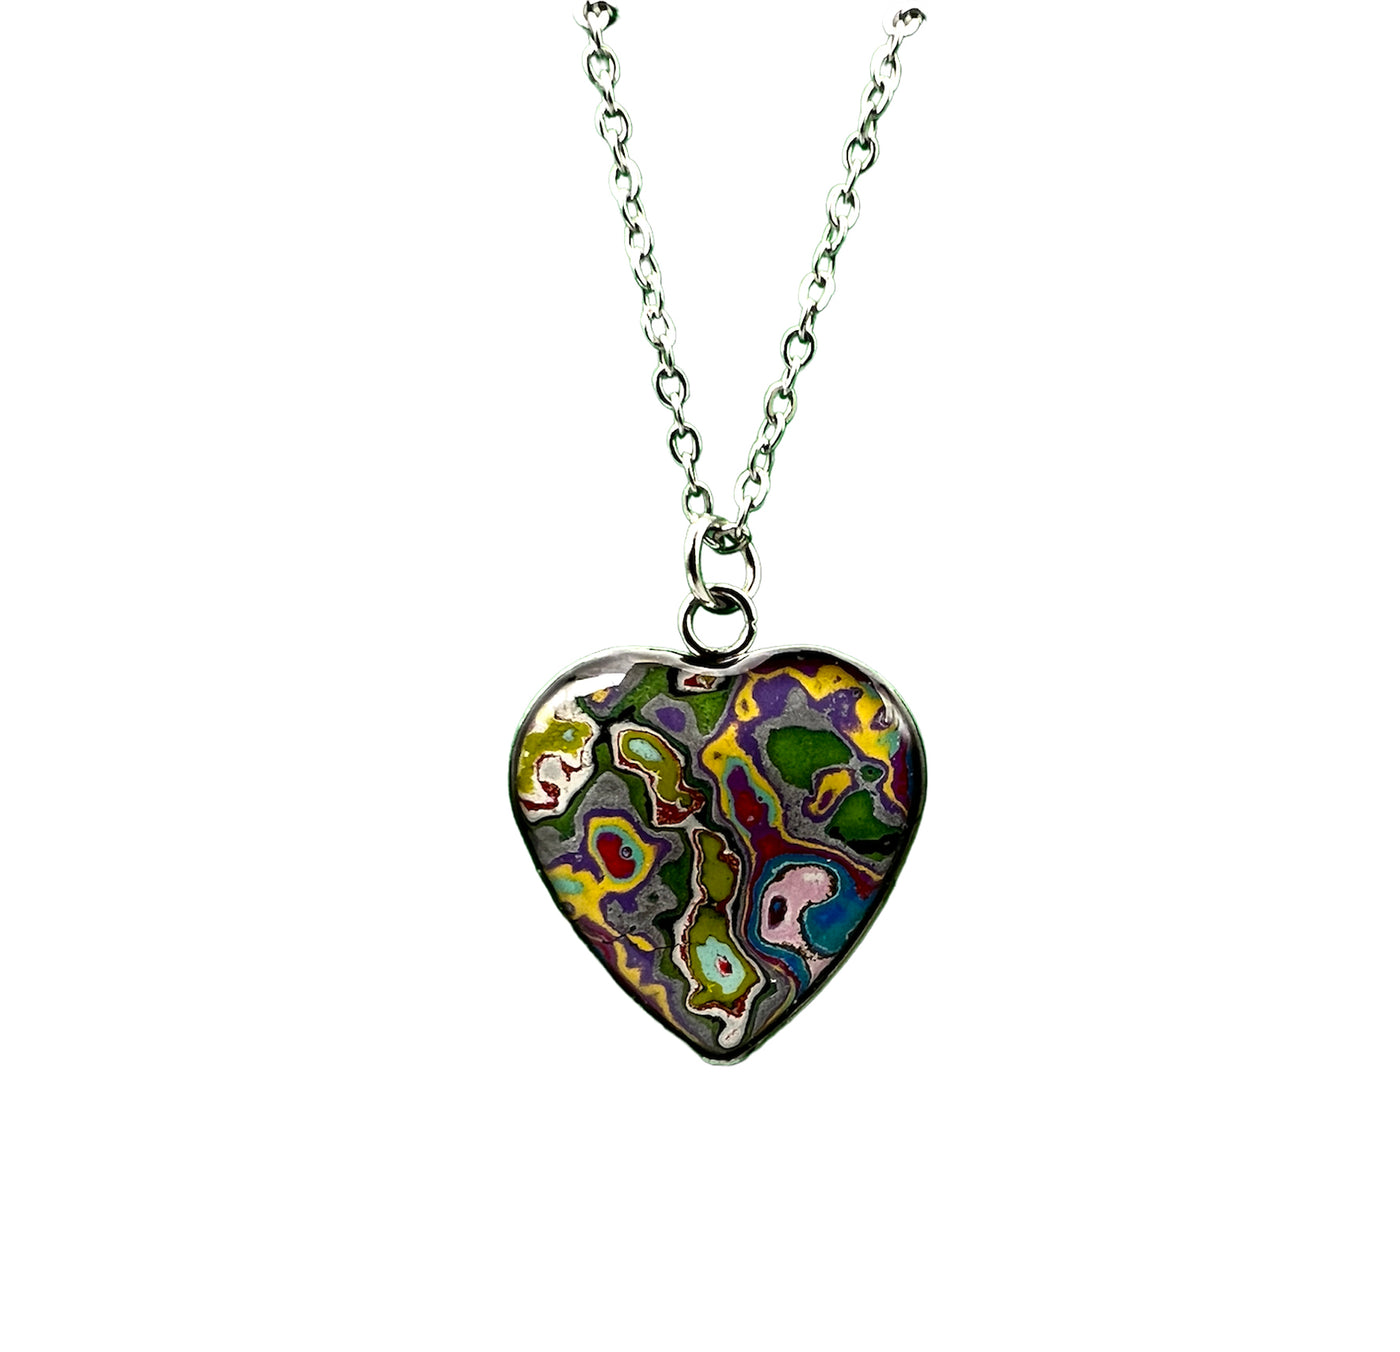 Heart Charm (20mm) and Necklace 20" Stainless Steel